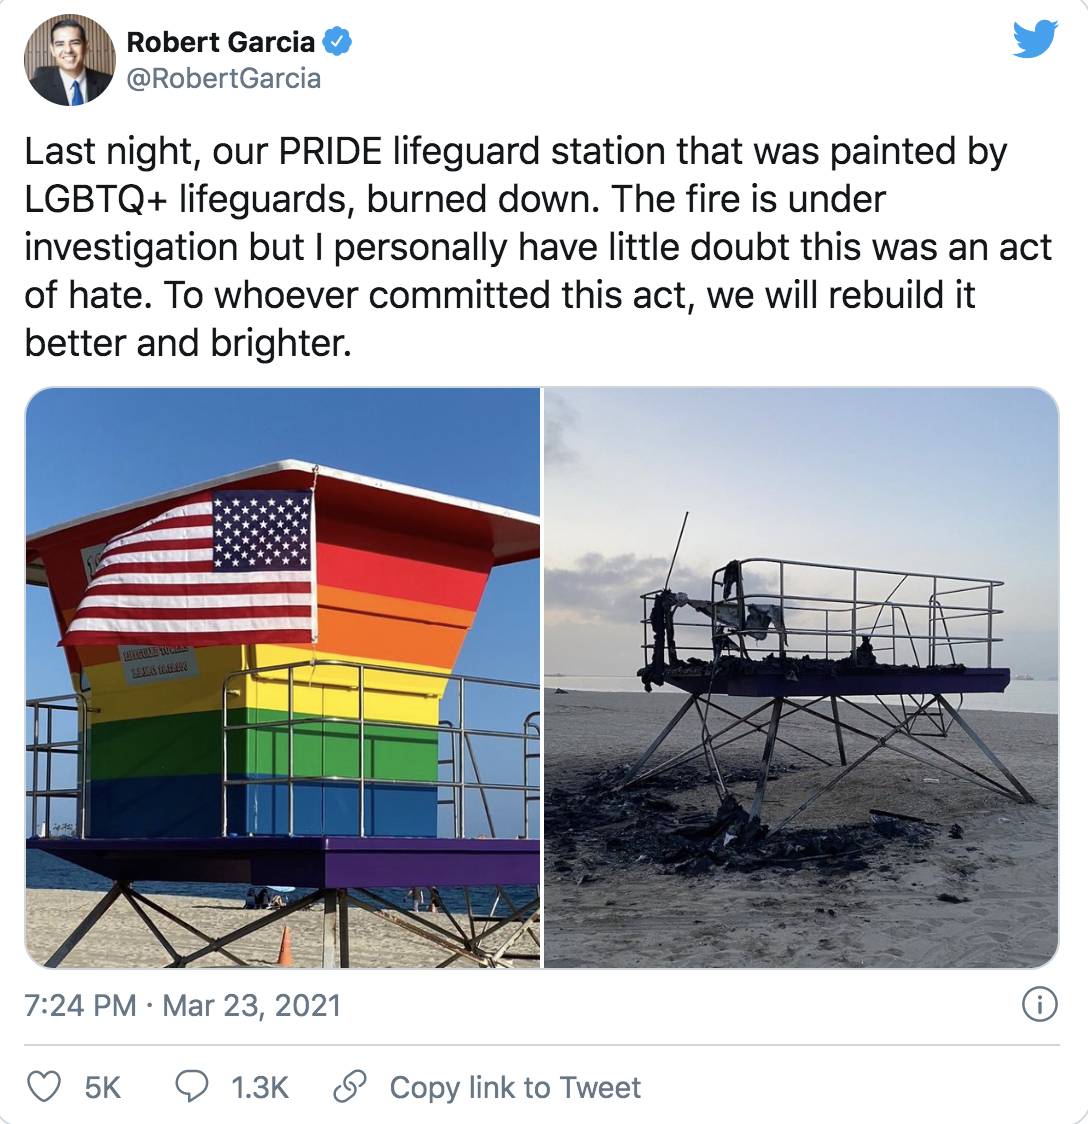 Pride Lifeguard Tower Burned Down In An Act Of Anti-LGBT+ Hate